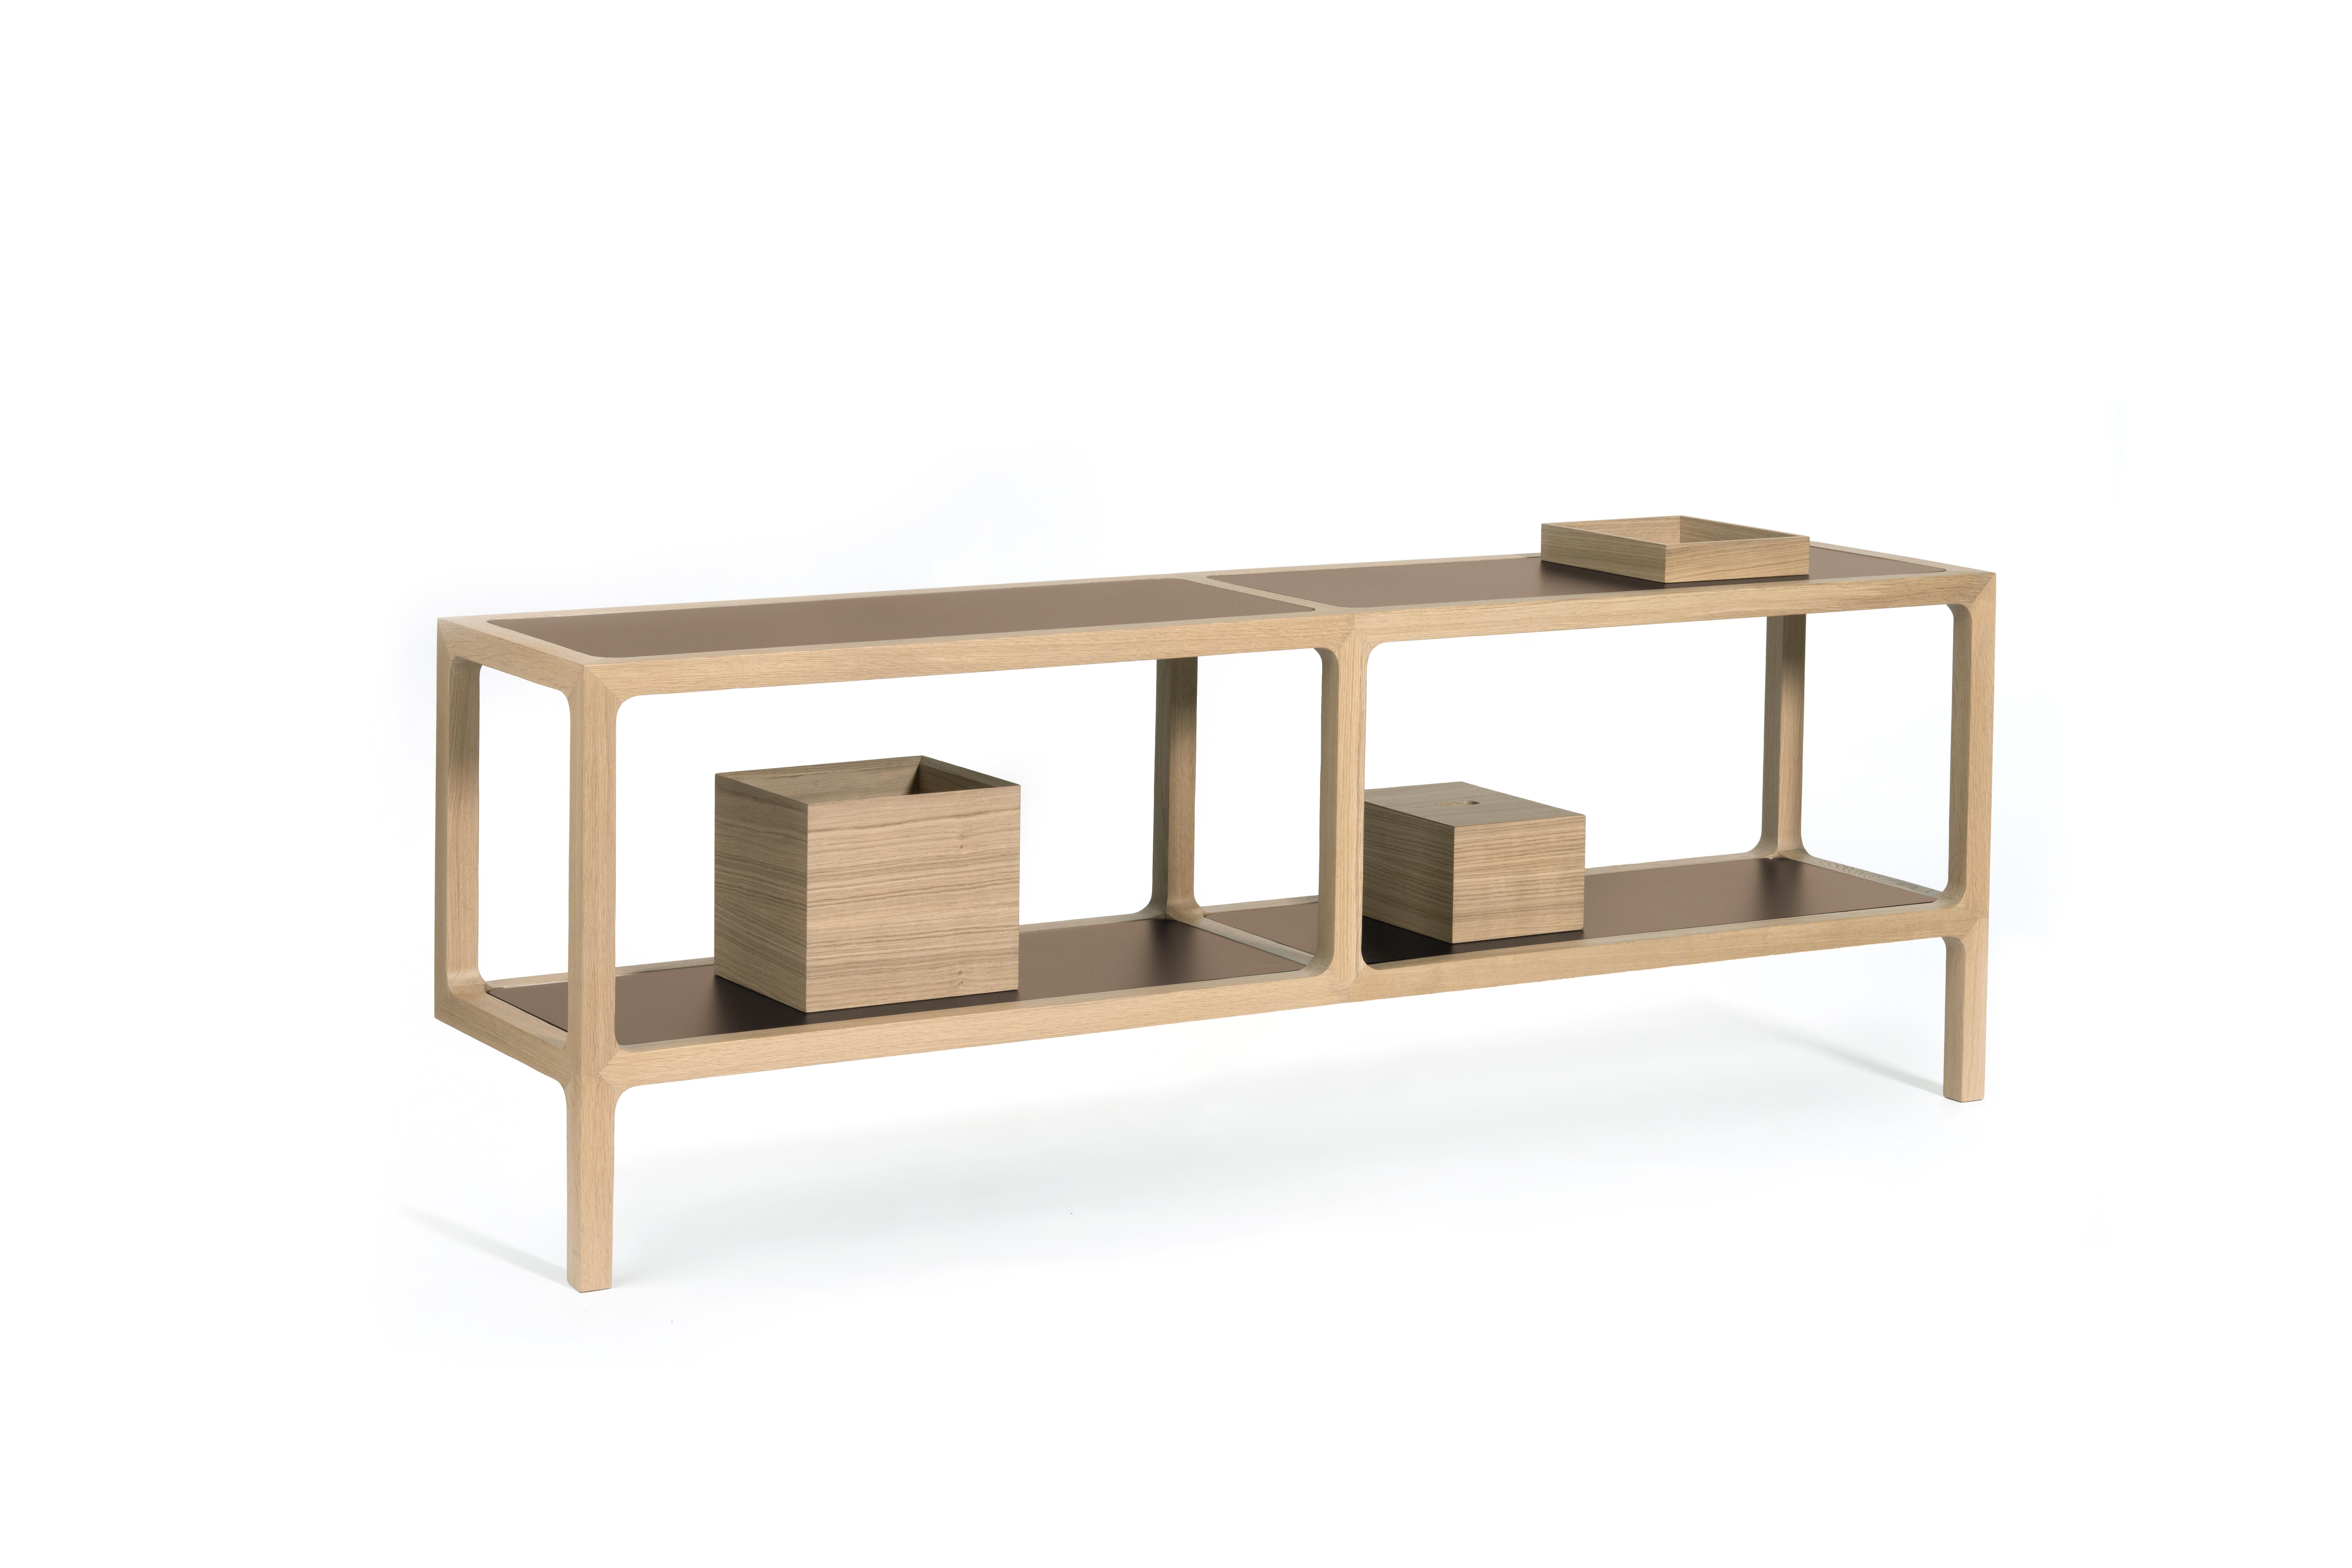 More Box 5 by Mentemano
Dimensions: W20 x D 28 x H 5 cm
Materials: Oak


A tray and two boxes available in two dimensions with cover, made of wood with bronze mirror inserts as possible option.


Mentemano is a design concept brand leading